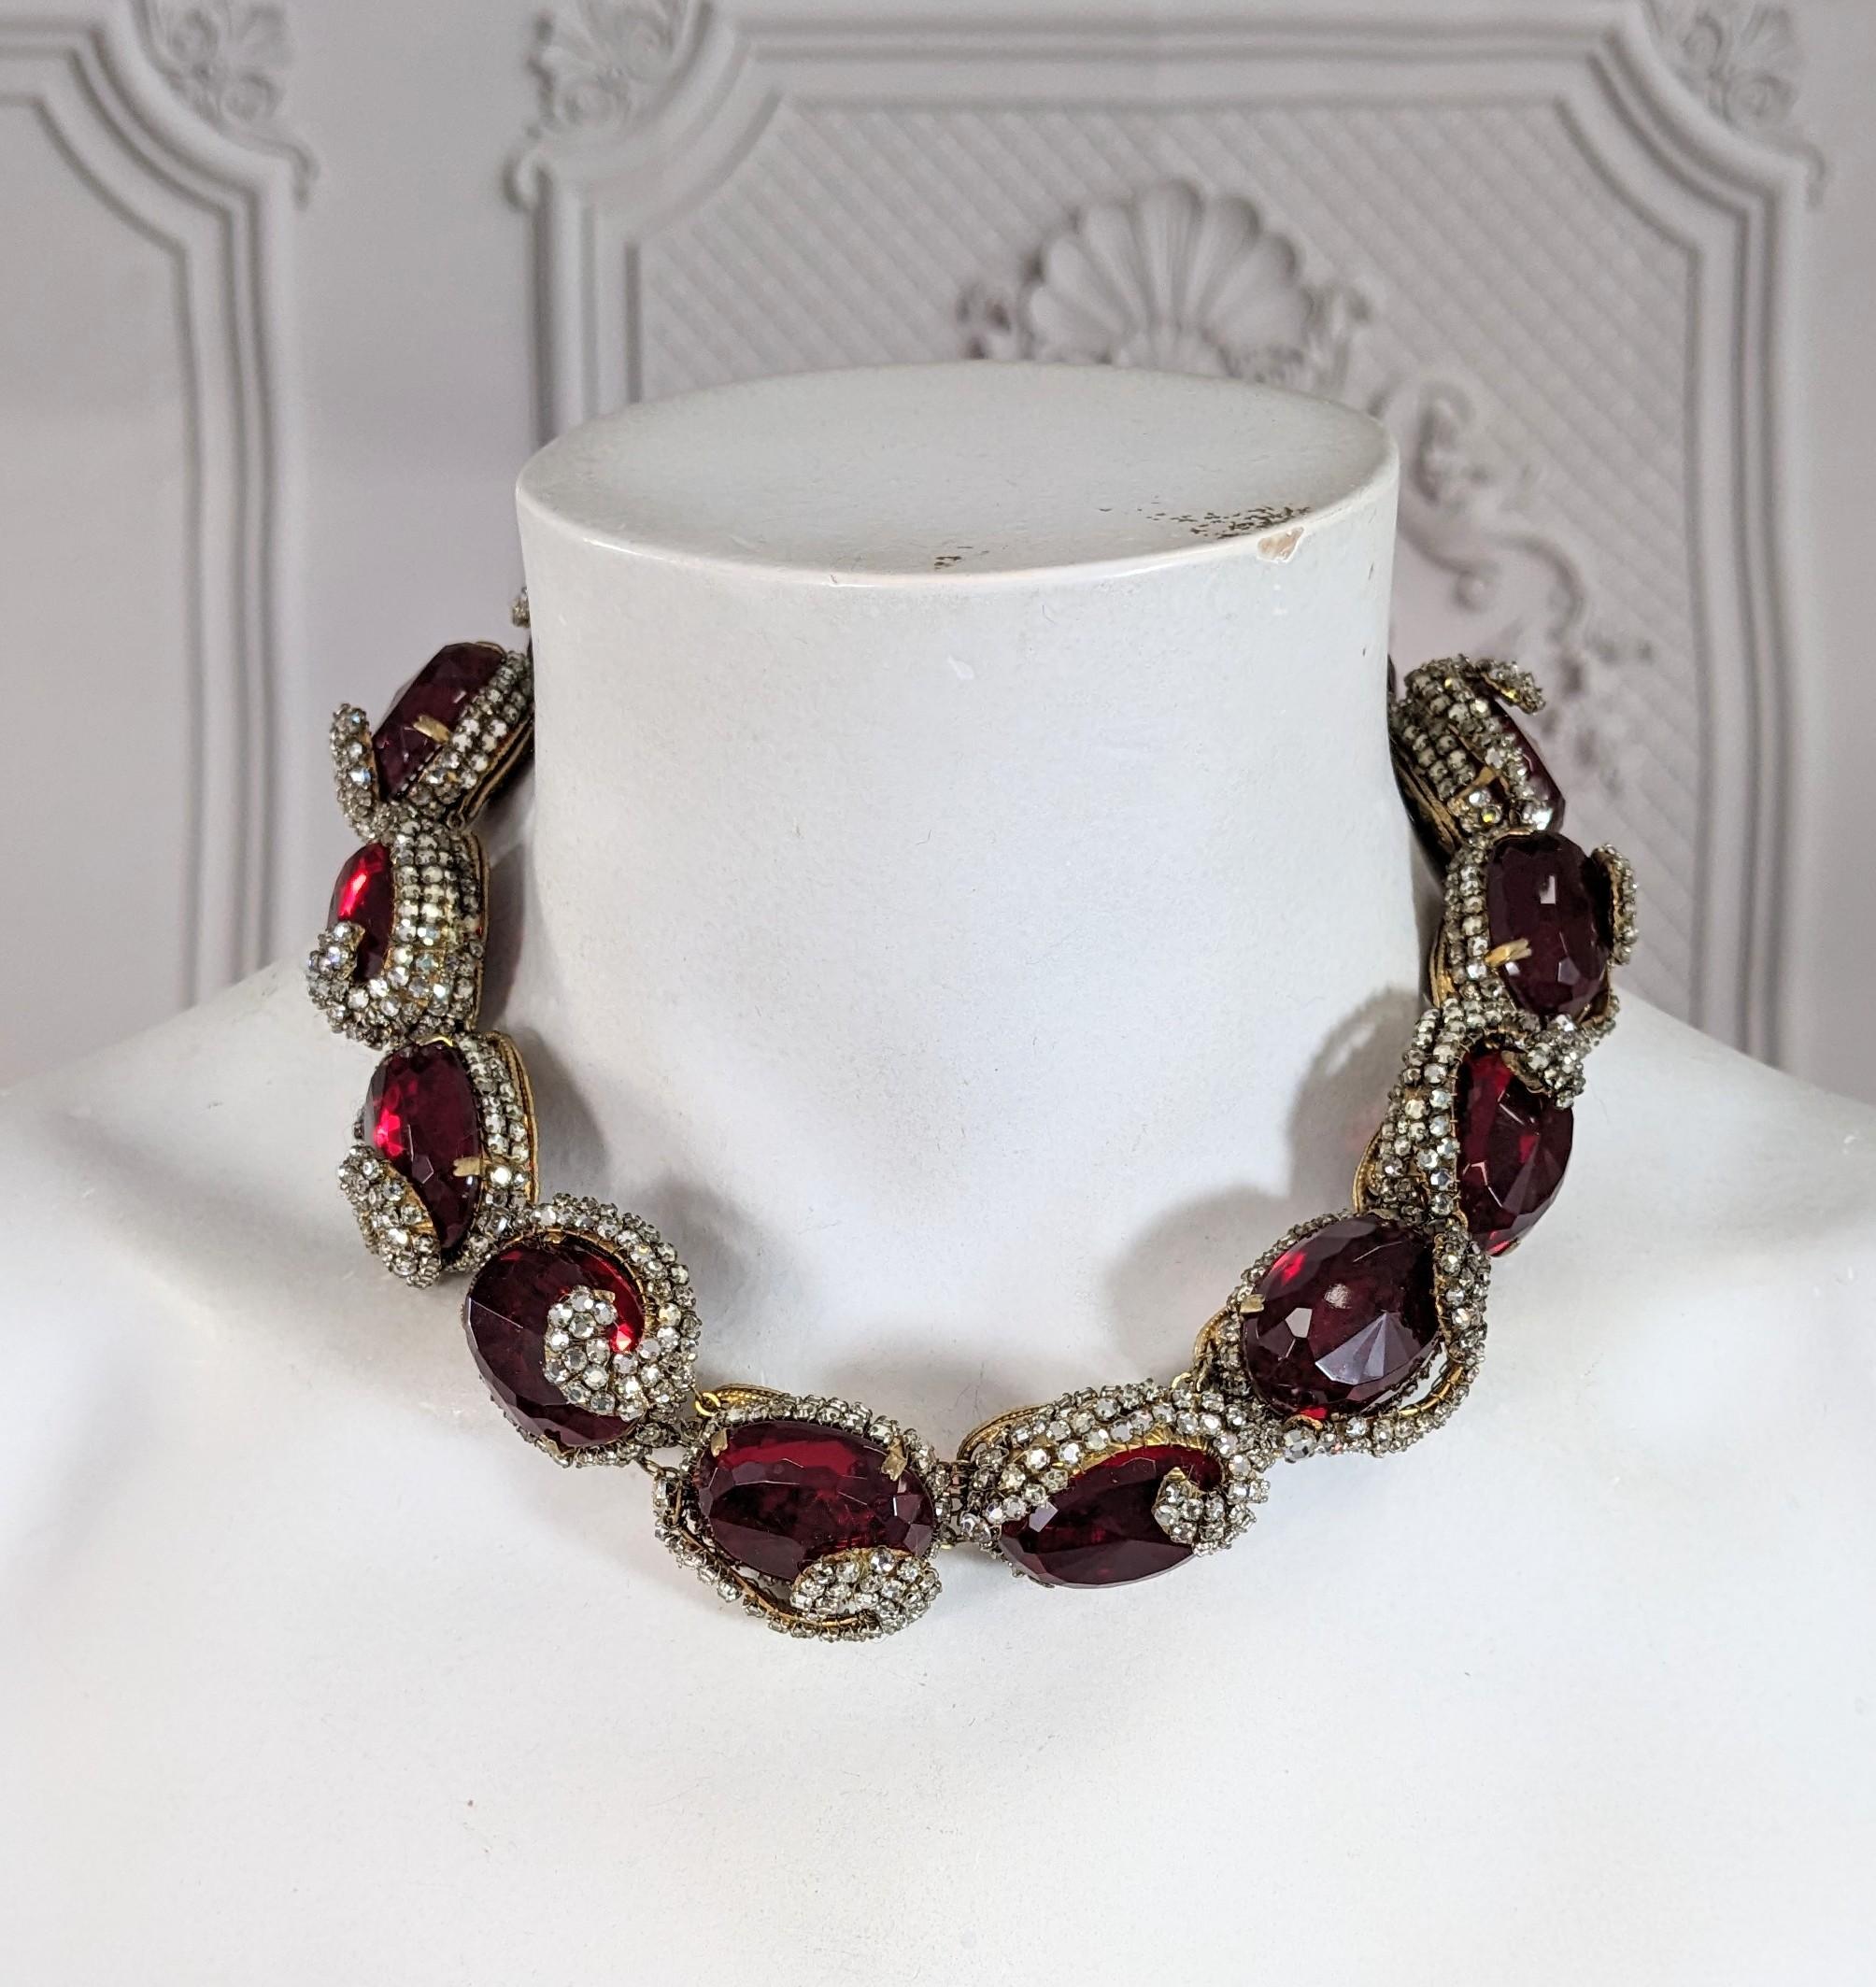 Rare Miriam Haskell Ruby Stone Collar with Rose Montee Decoration For Sale 8